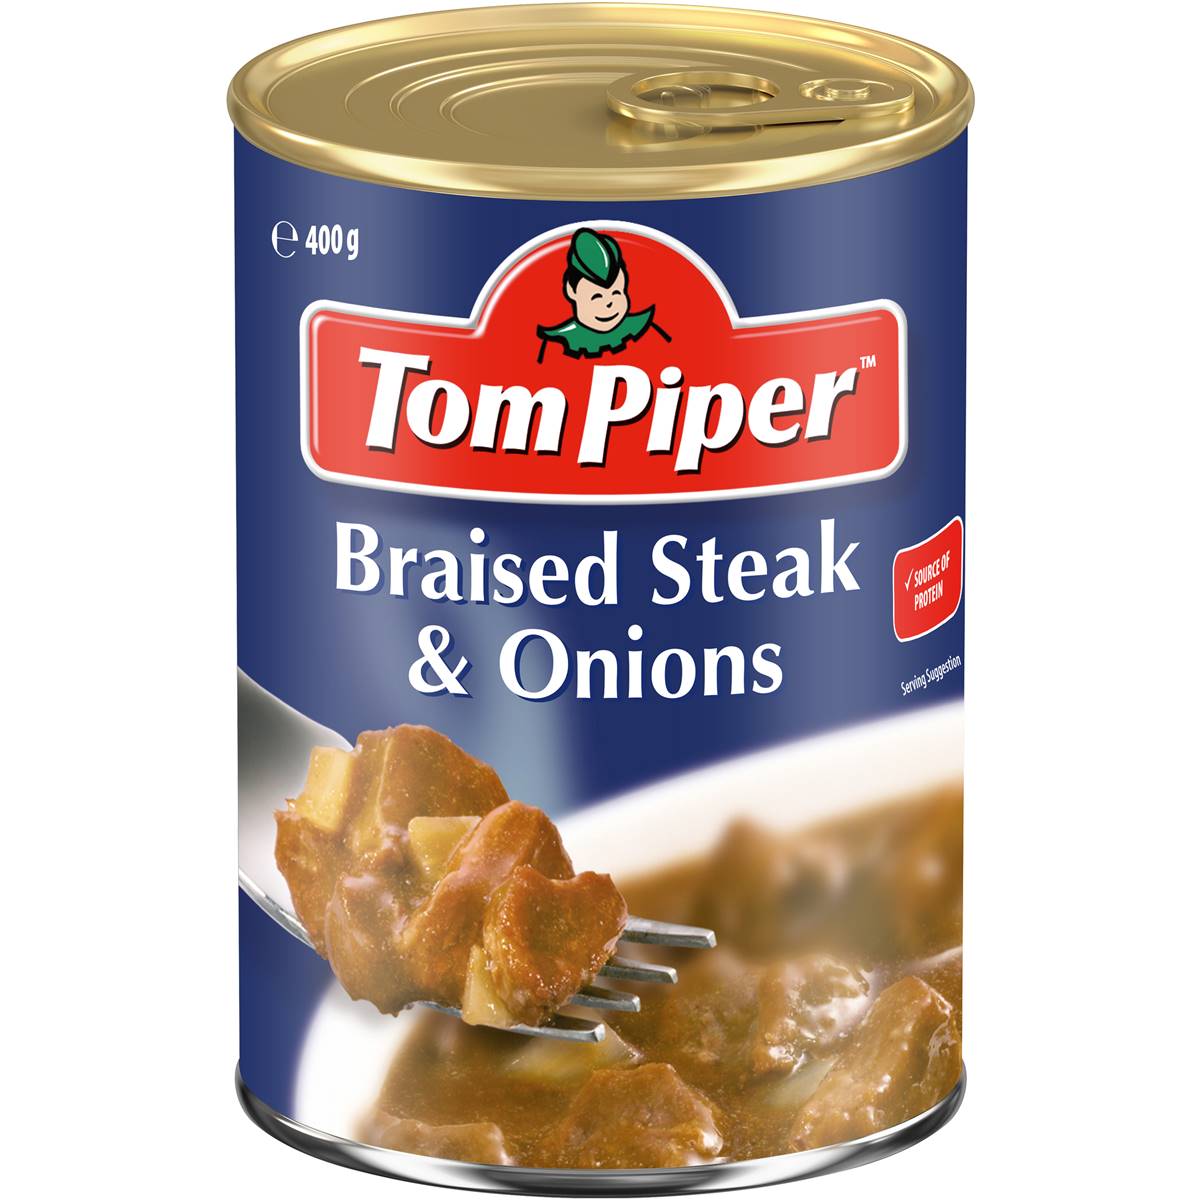 Calories in Tom Piper Braised Steak & Onions Canned Meal